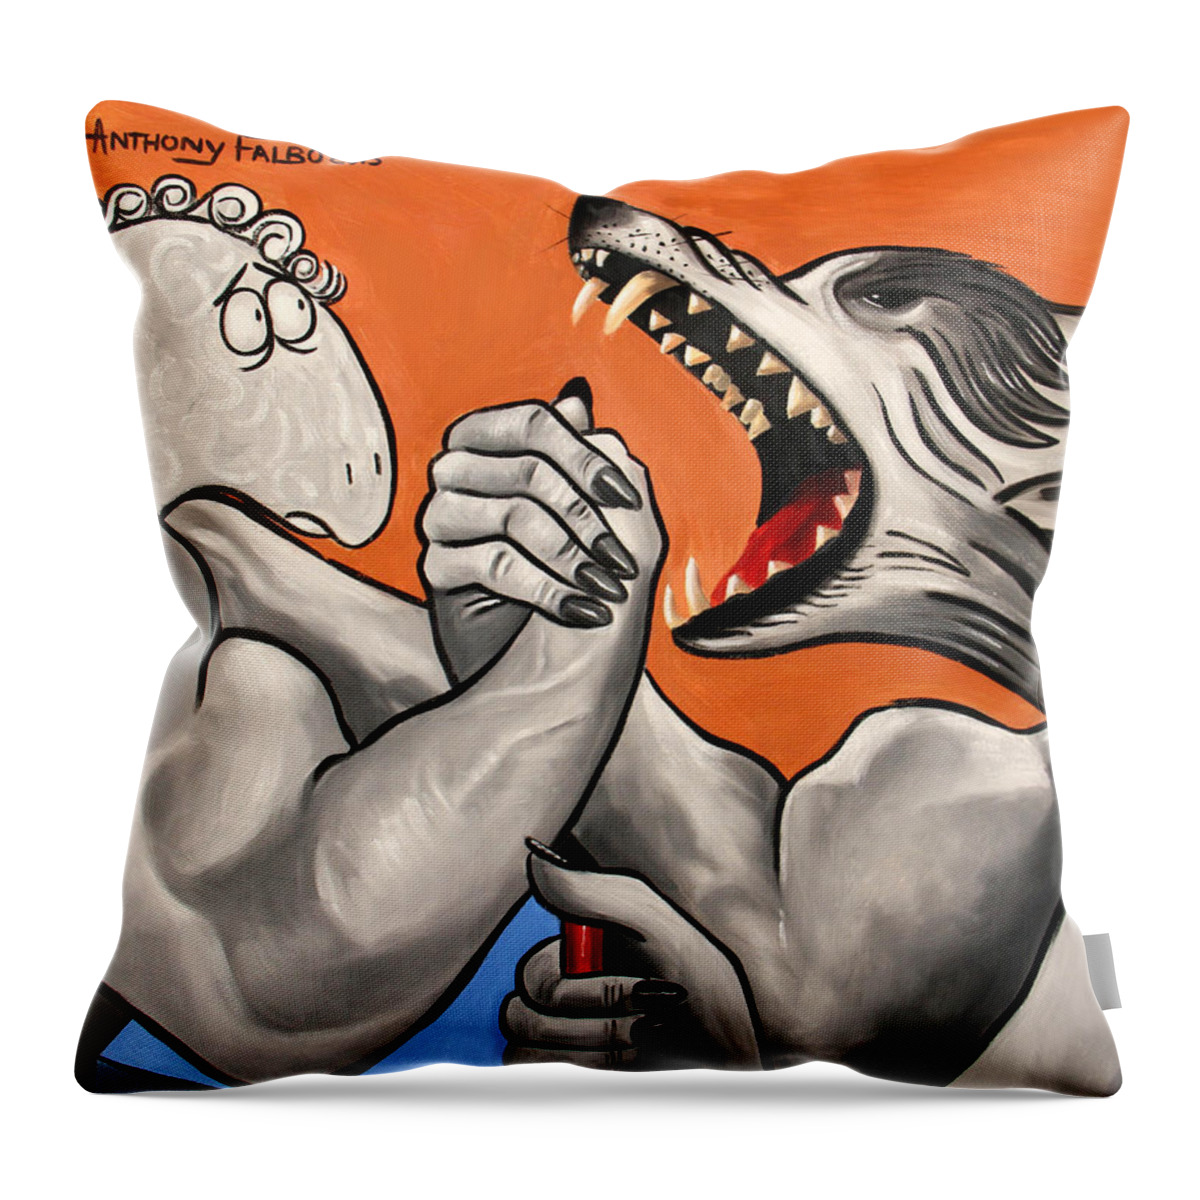 Good Verse Evil Throw Pillow featuring the painting Good Verse Evil by Anthony Falbo